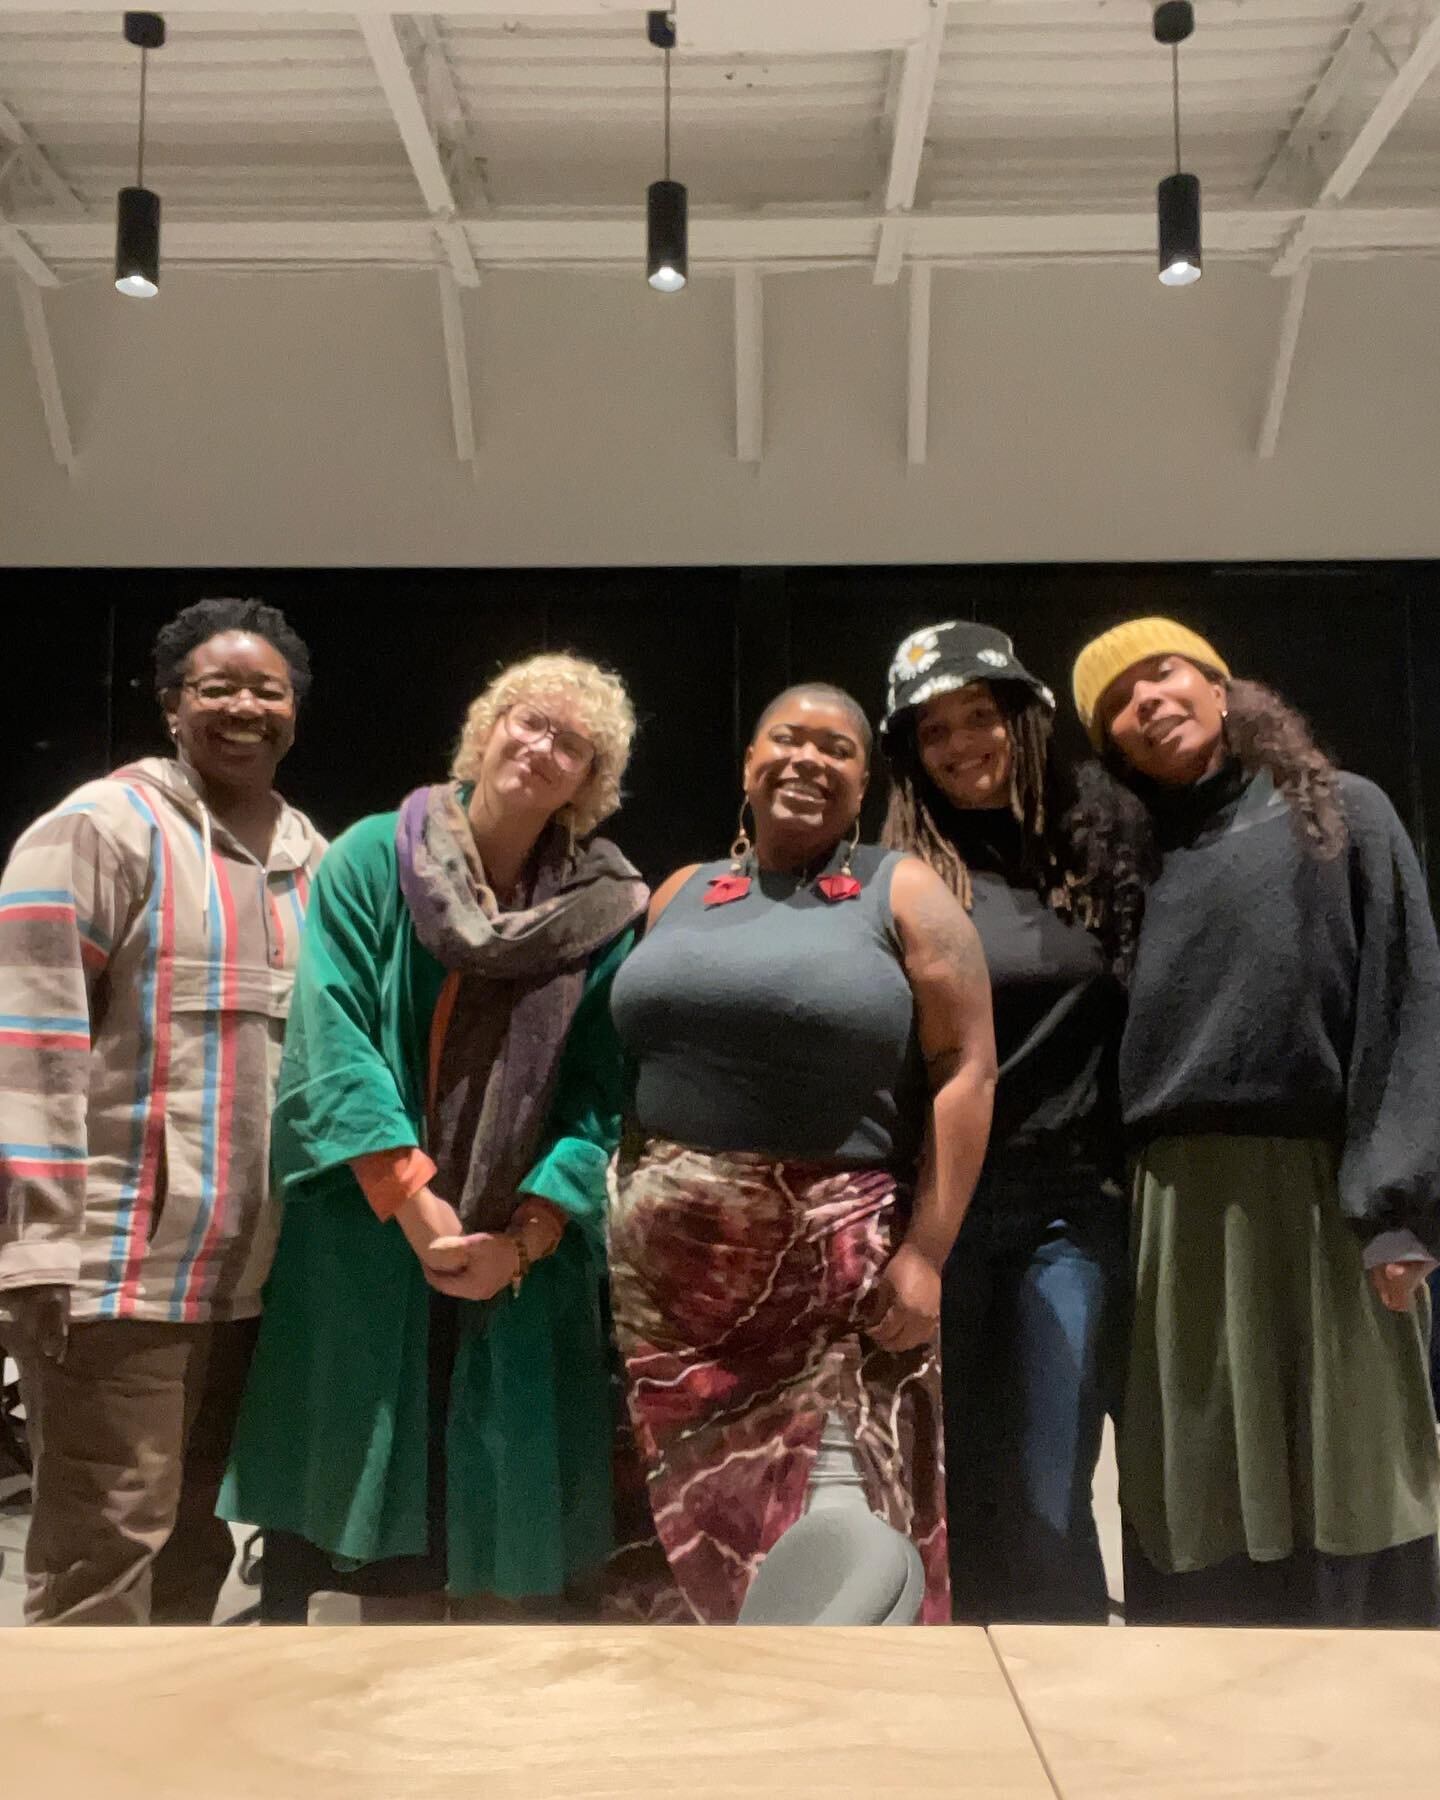 We&rsquo;re happy to announce that we will be the home for a beloved public program, Midwest Poetics. This literature centered program has been cultivated over the last two years by vocalists, writers, poets, musicians and performers based in the Mid